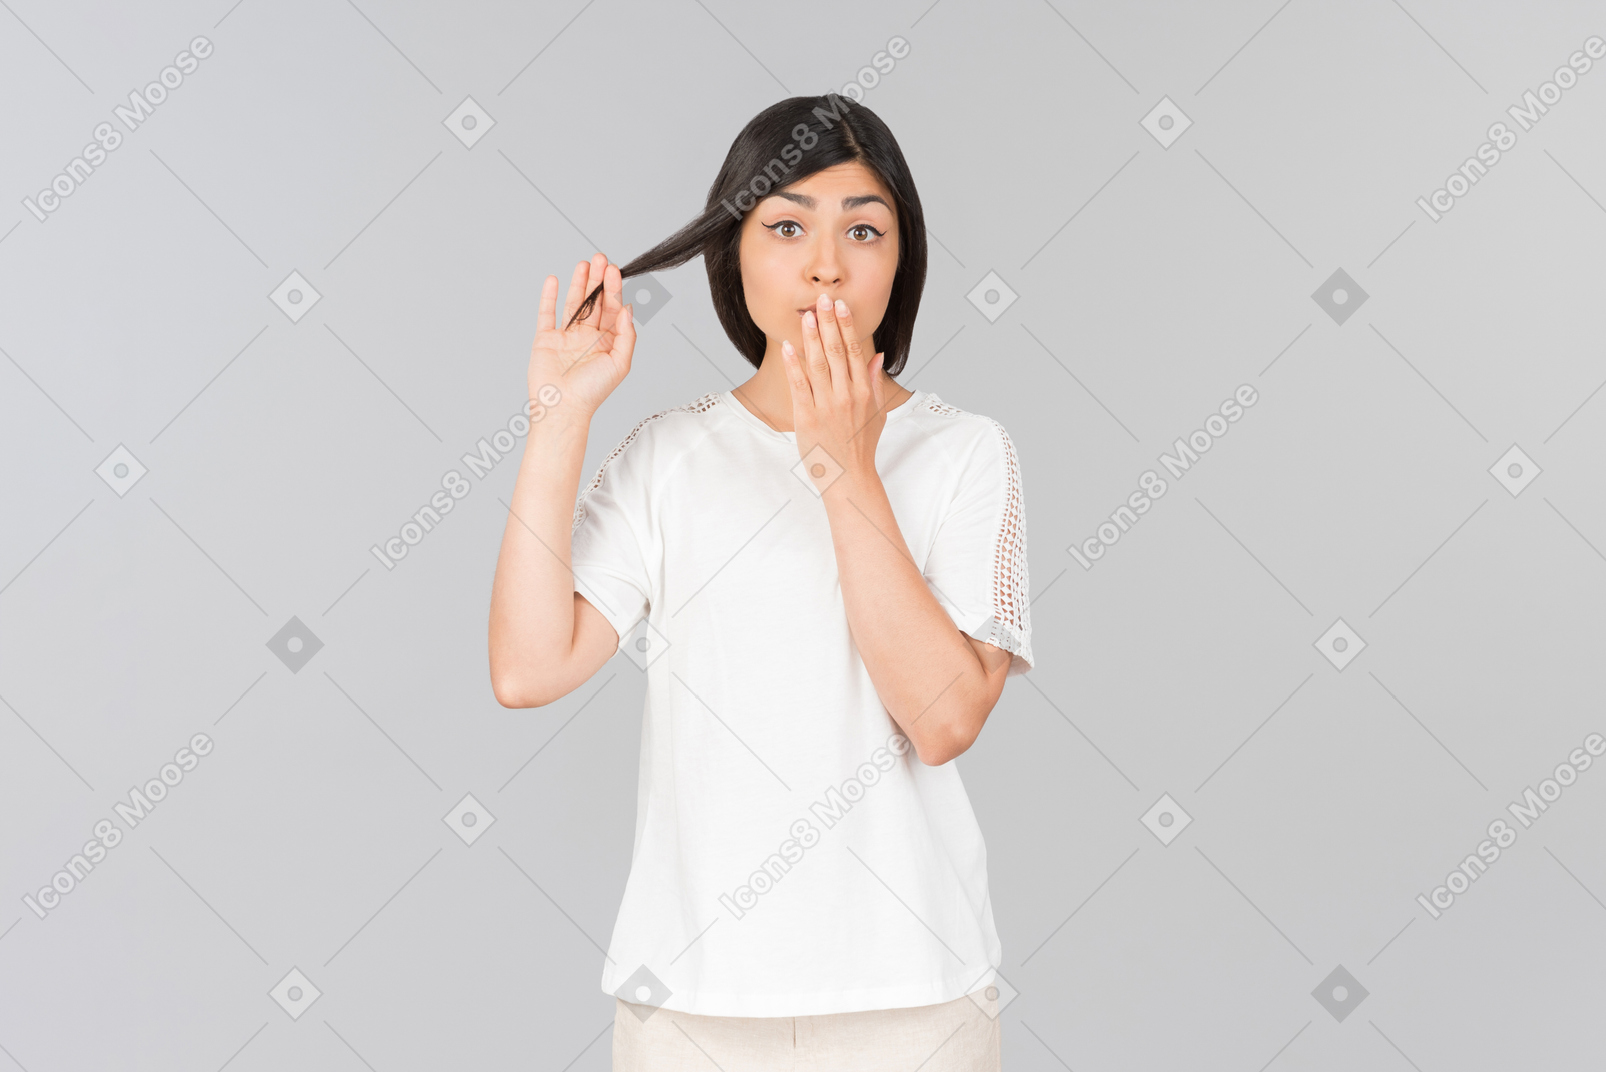 Surprised young indian woman closing mouth with a hand